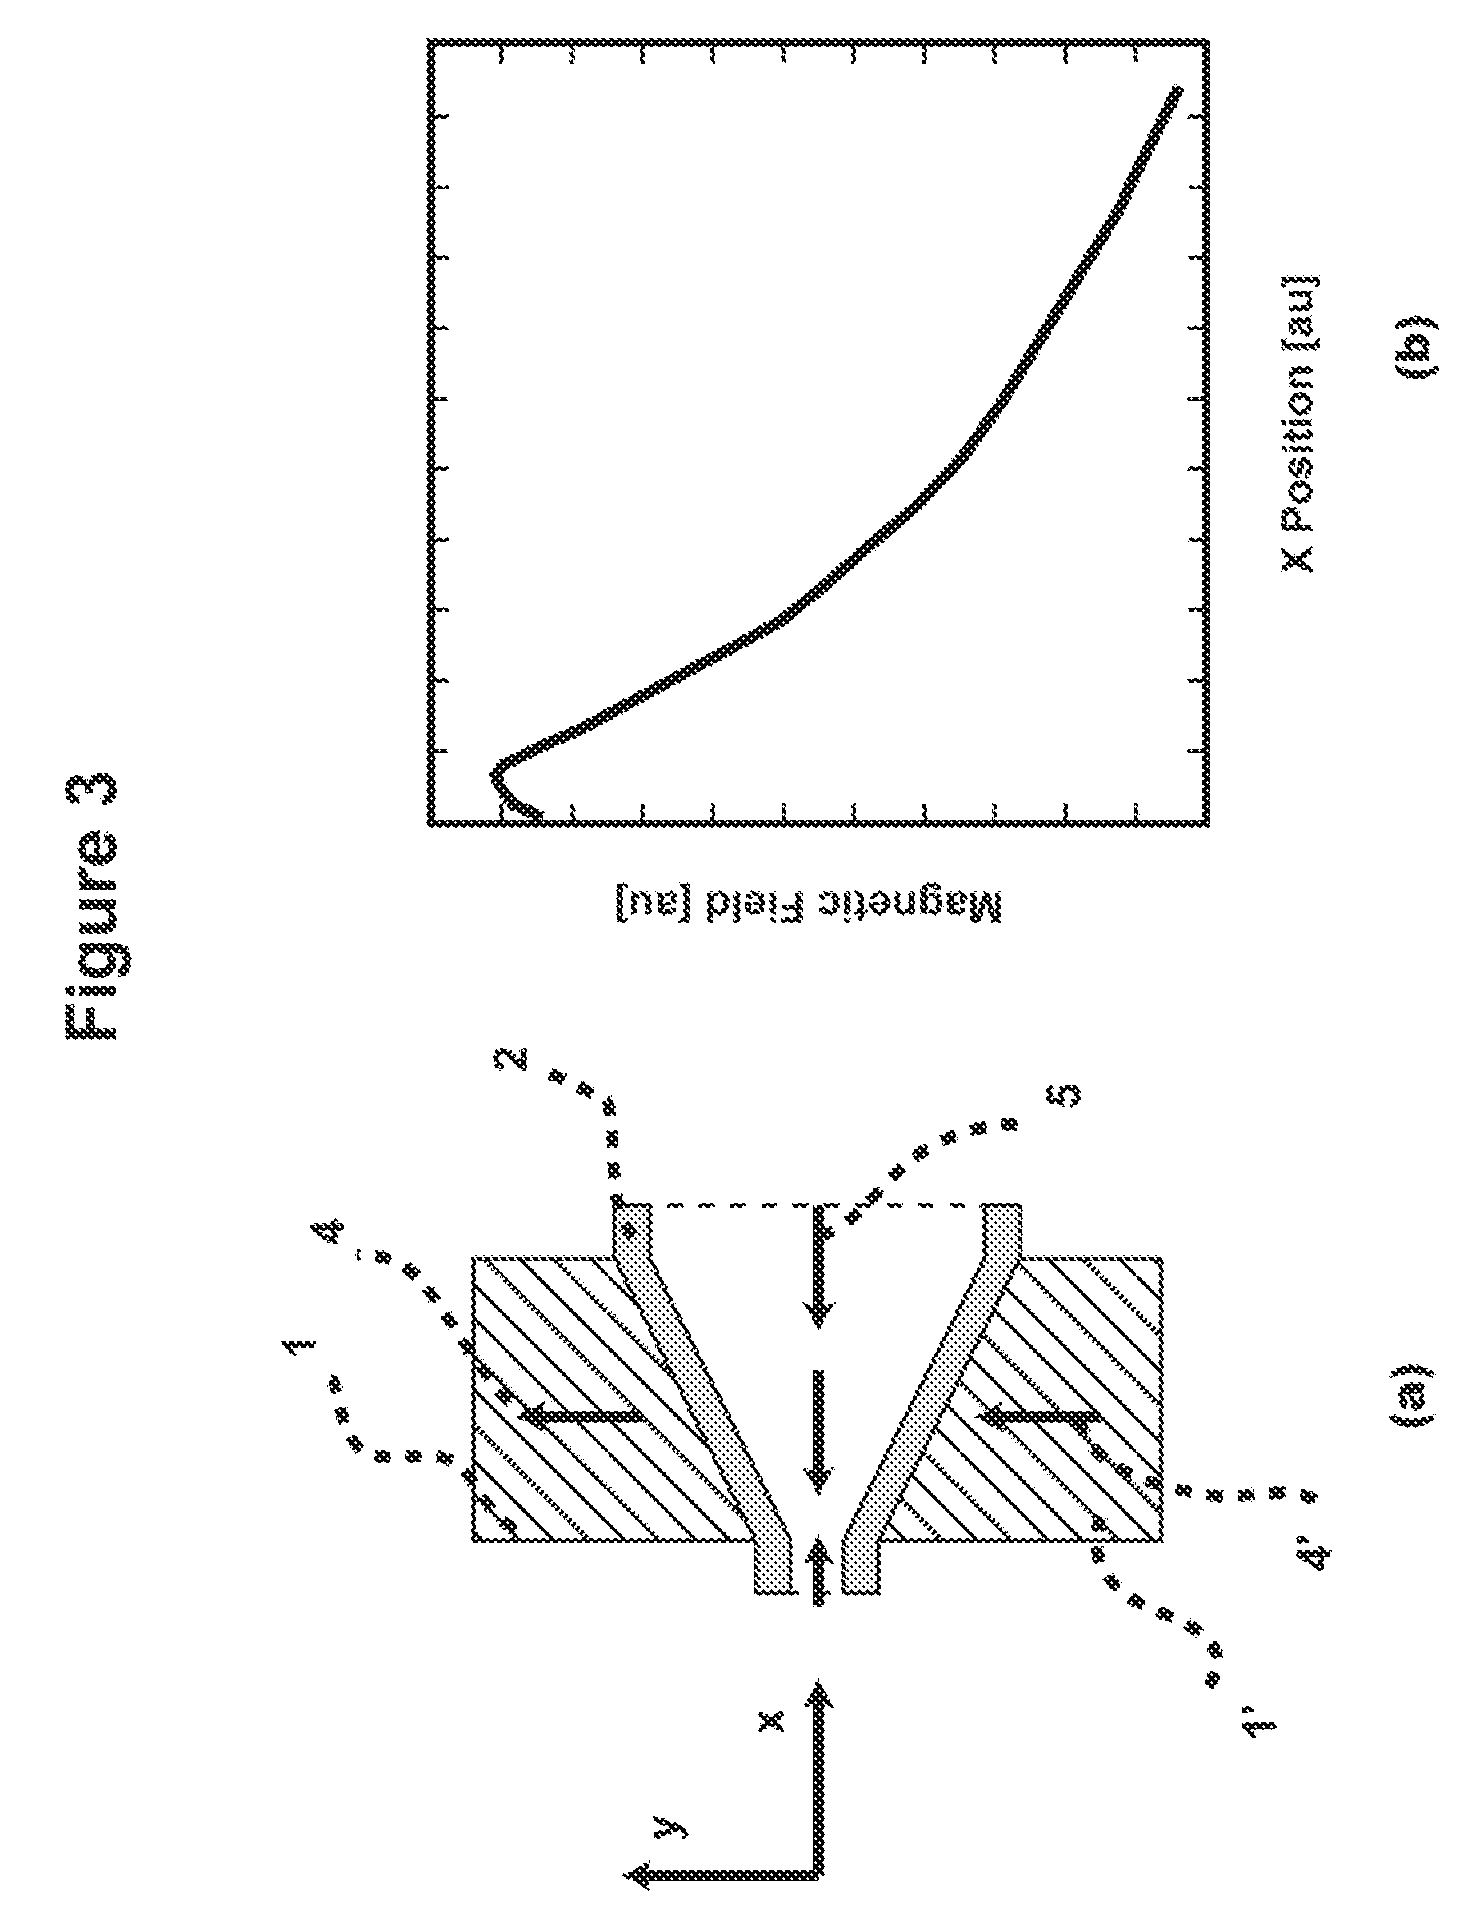 Device and Method for Manipulating and Mixing Magnetic Particles in a Liquid Medium